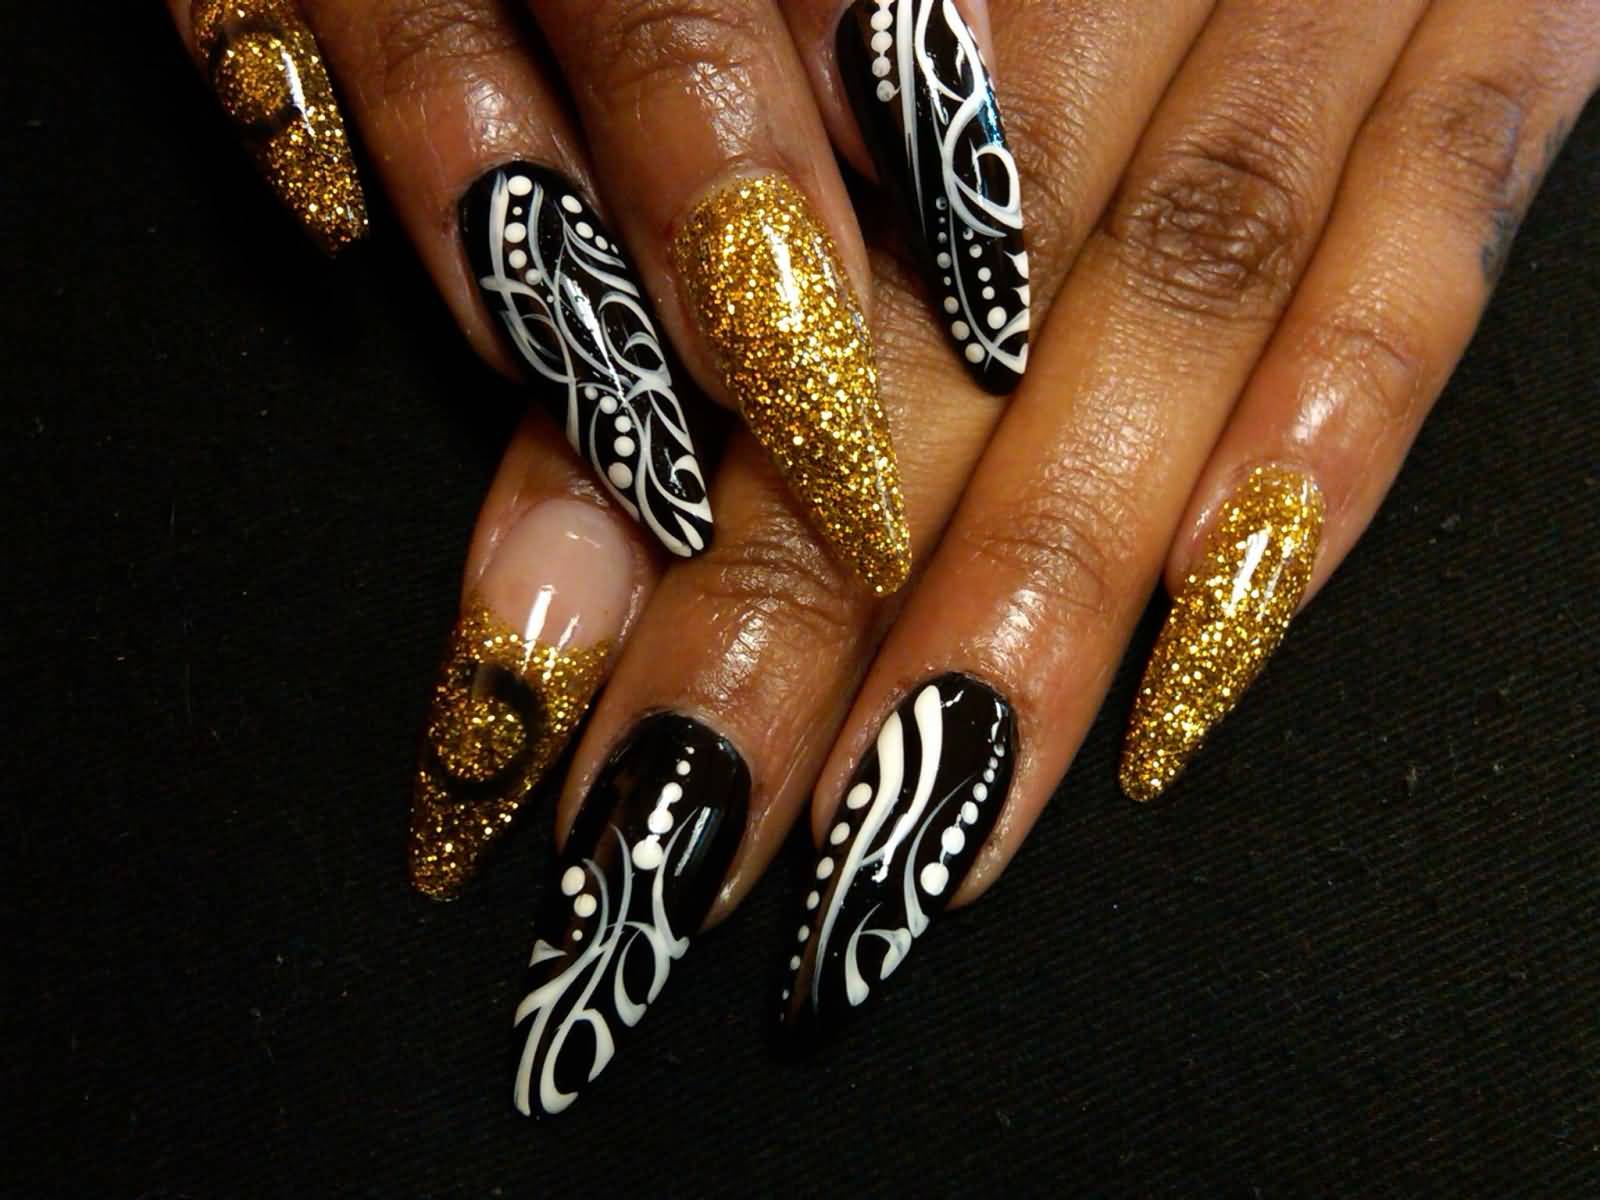 3. "10 Adorable Stiletto Nail Designs to Try Now" - wide 4